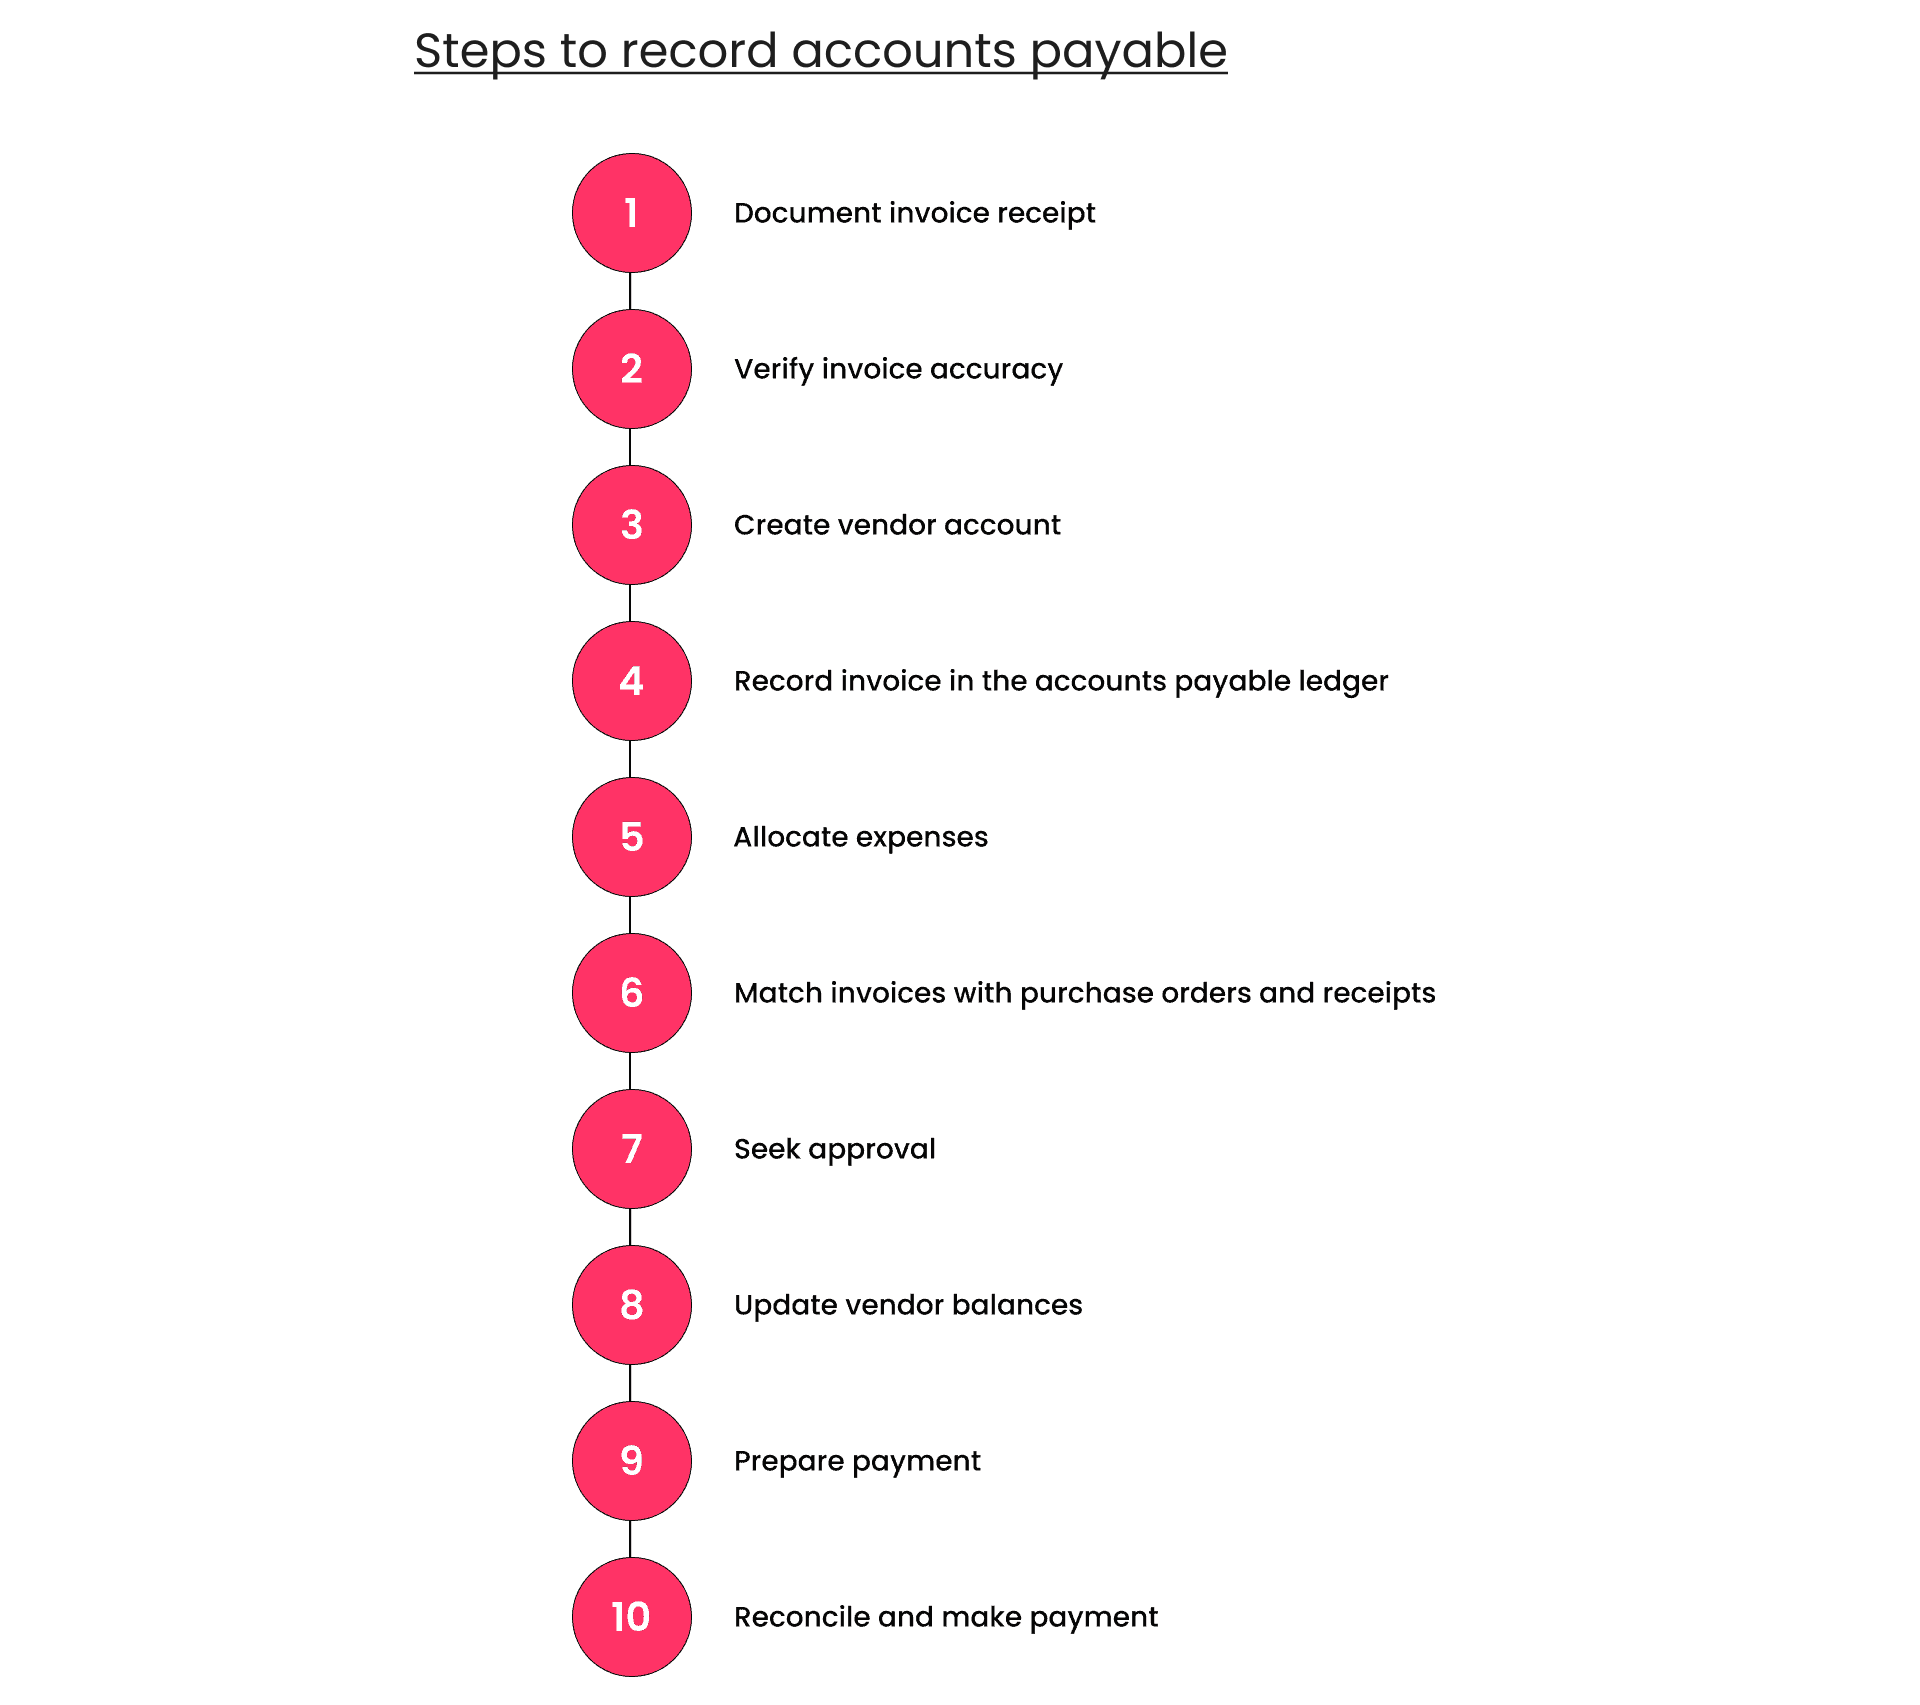 Step by step process on how to record accounts payable